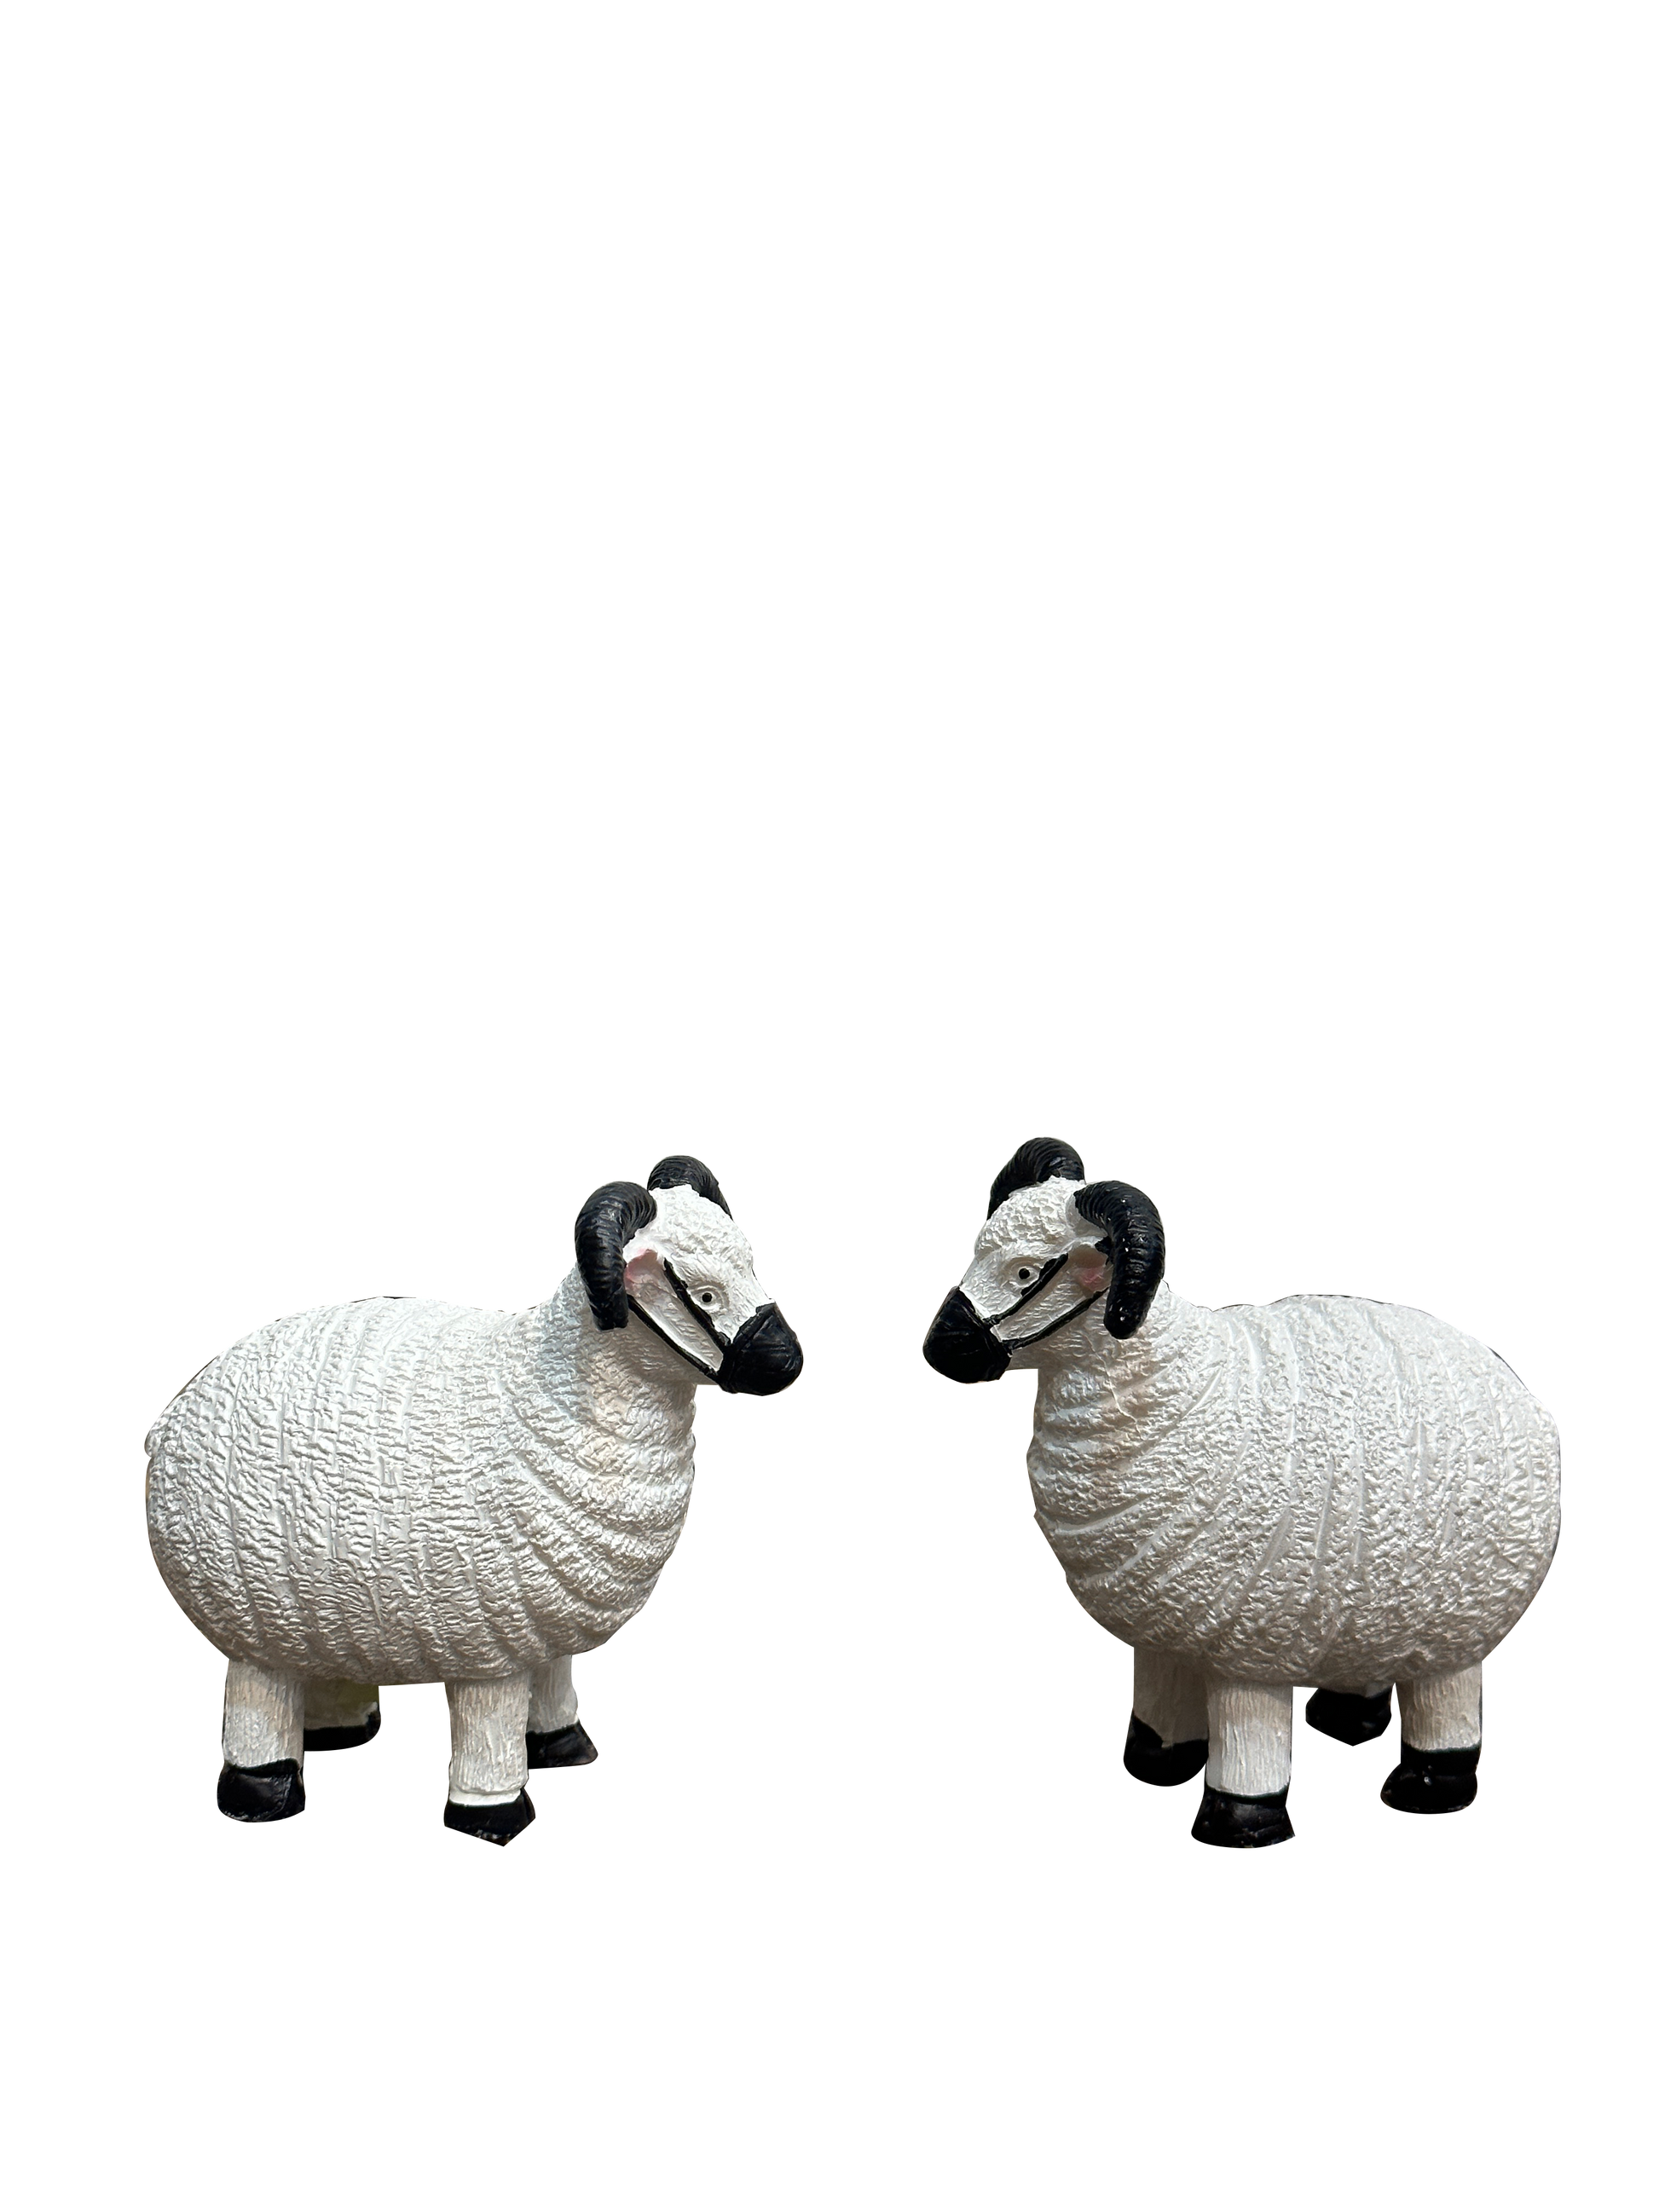 Artificial White Sheep With Black Horns - Sunset Gifts Store